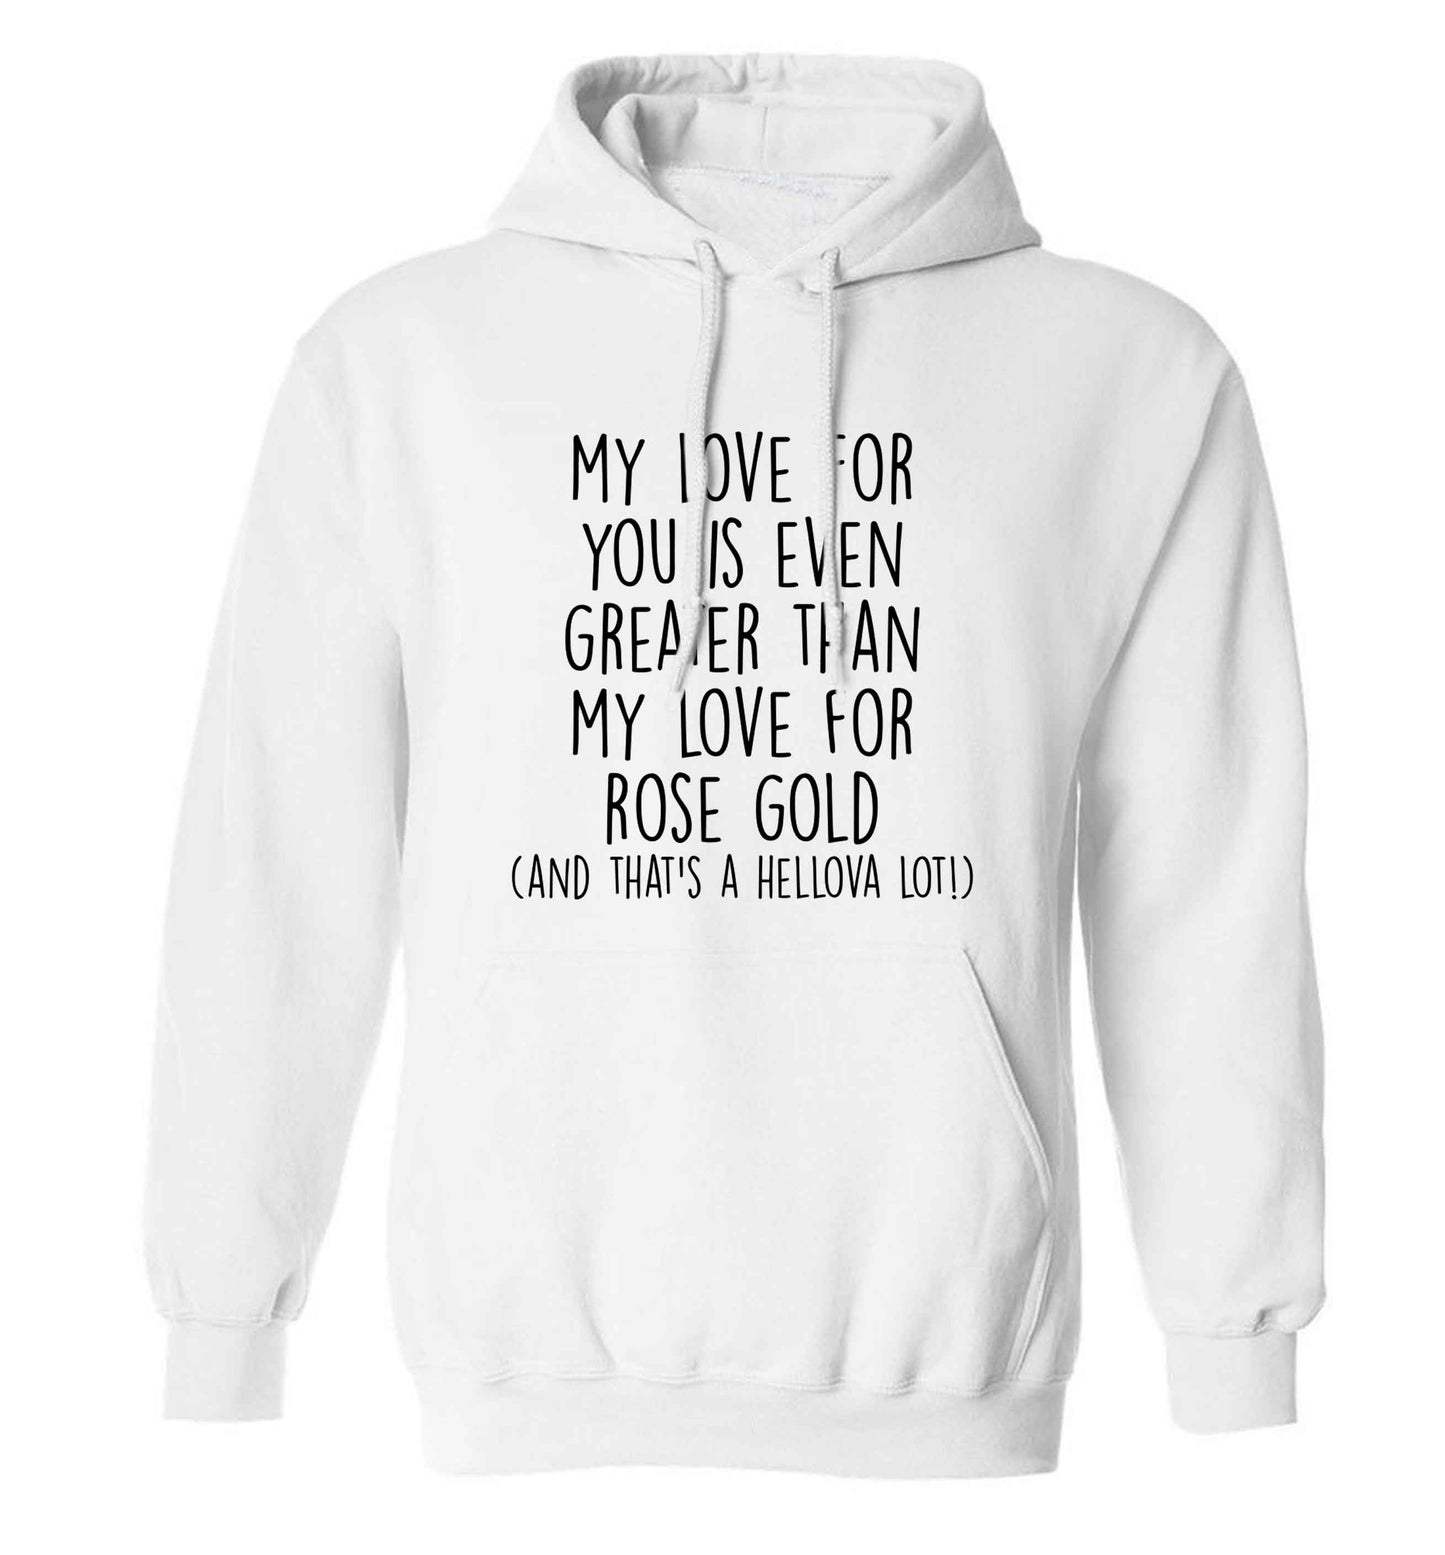 My love for you is even greater than my love for rose gold (and that's a hellova lot) adults unisex white hoodie 2XL